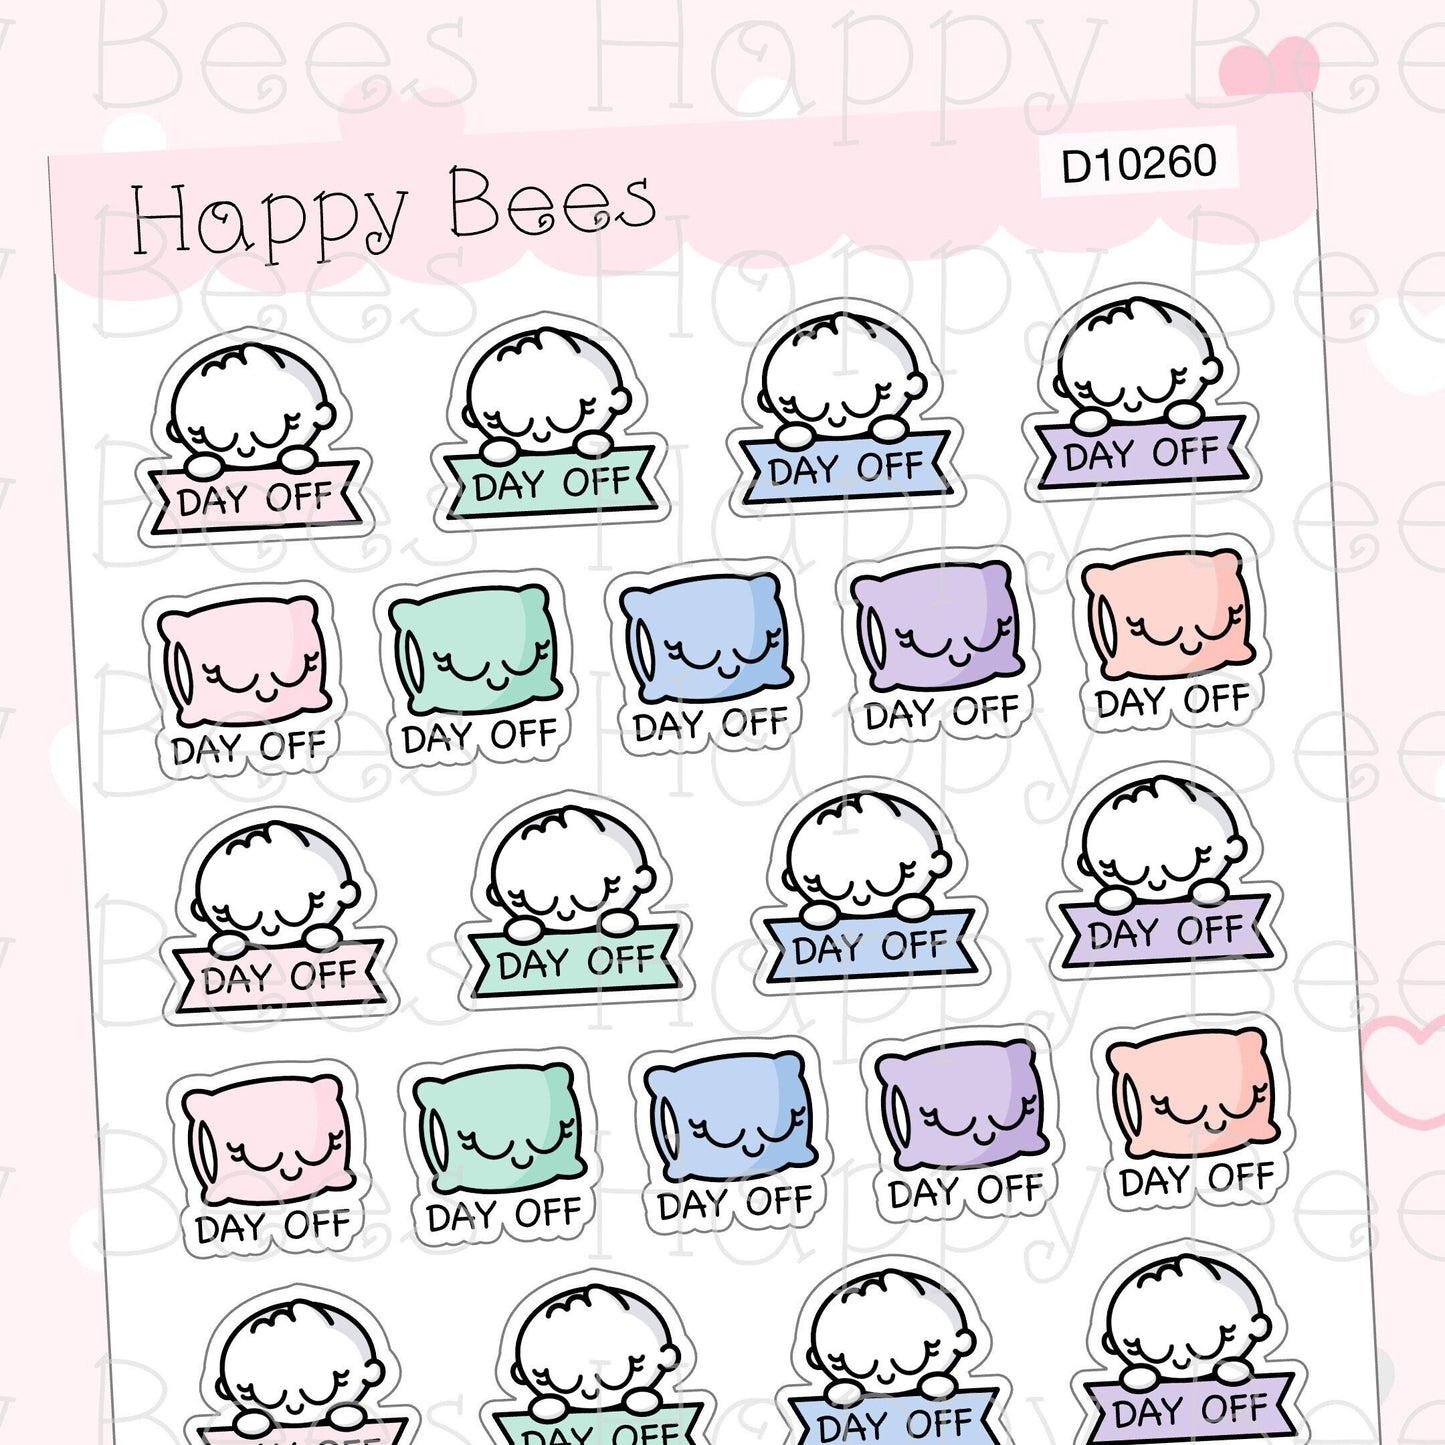 Day Off Doodles - Cute Holiday Functional Planner Stickers D10260